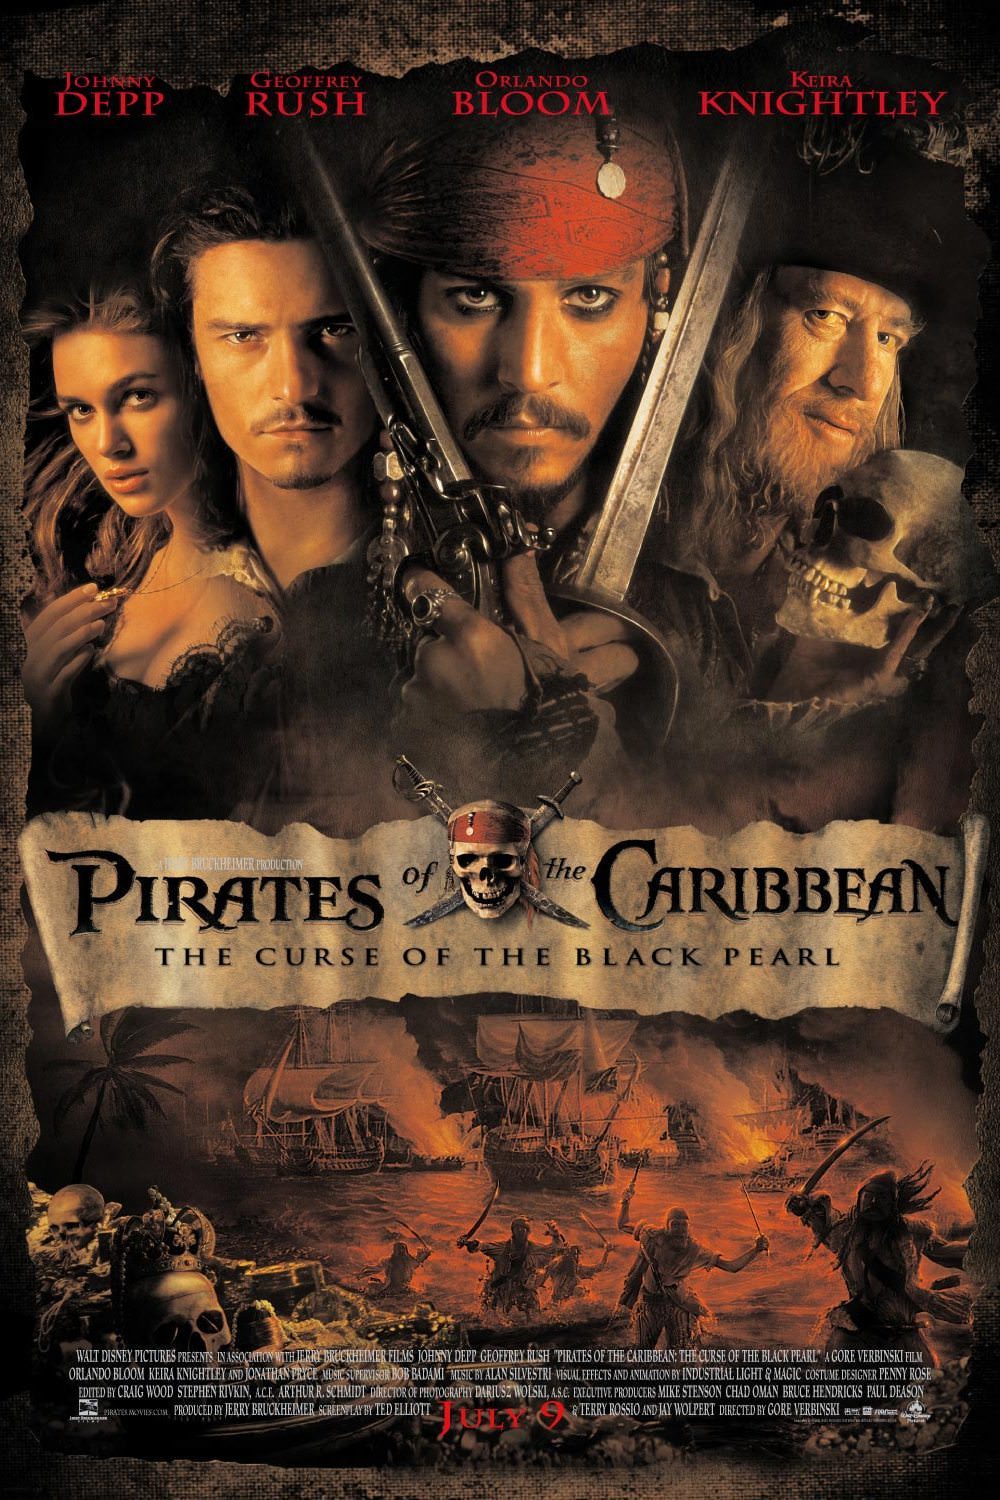 pirates-of-the-caribbean_-the-curse-of-the-black-pearl-2-disc-collectors-edition